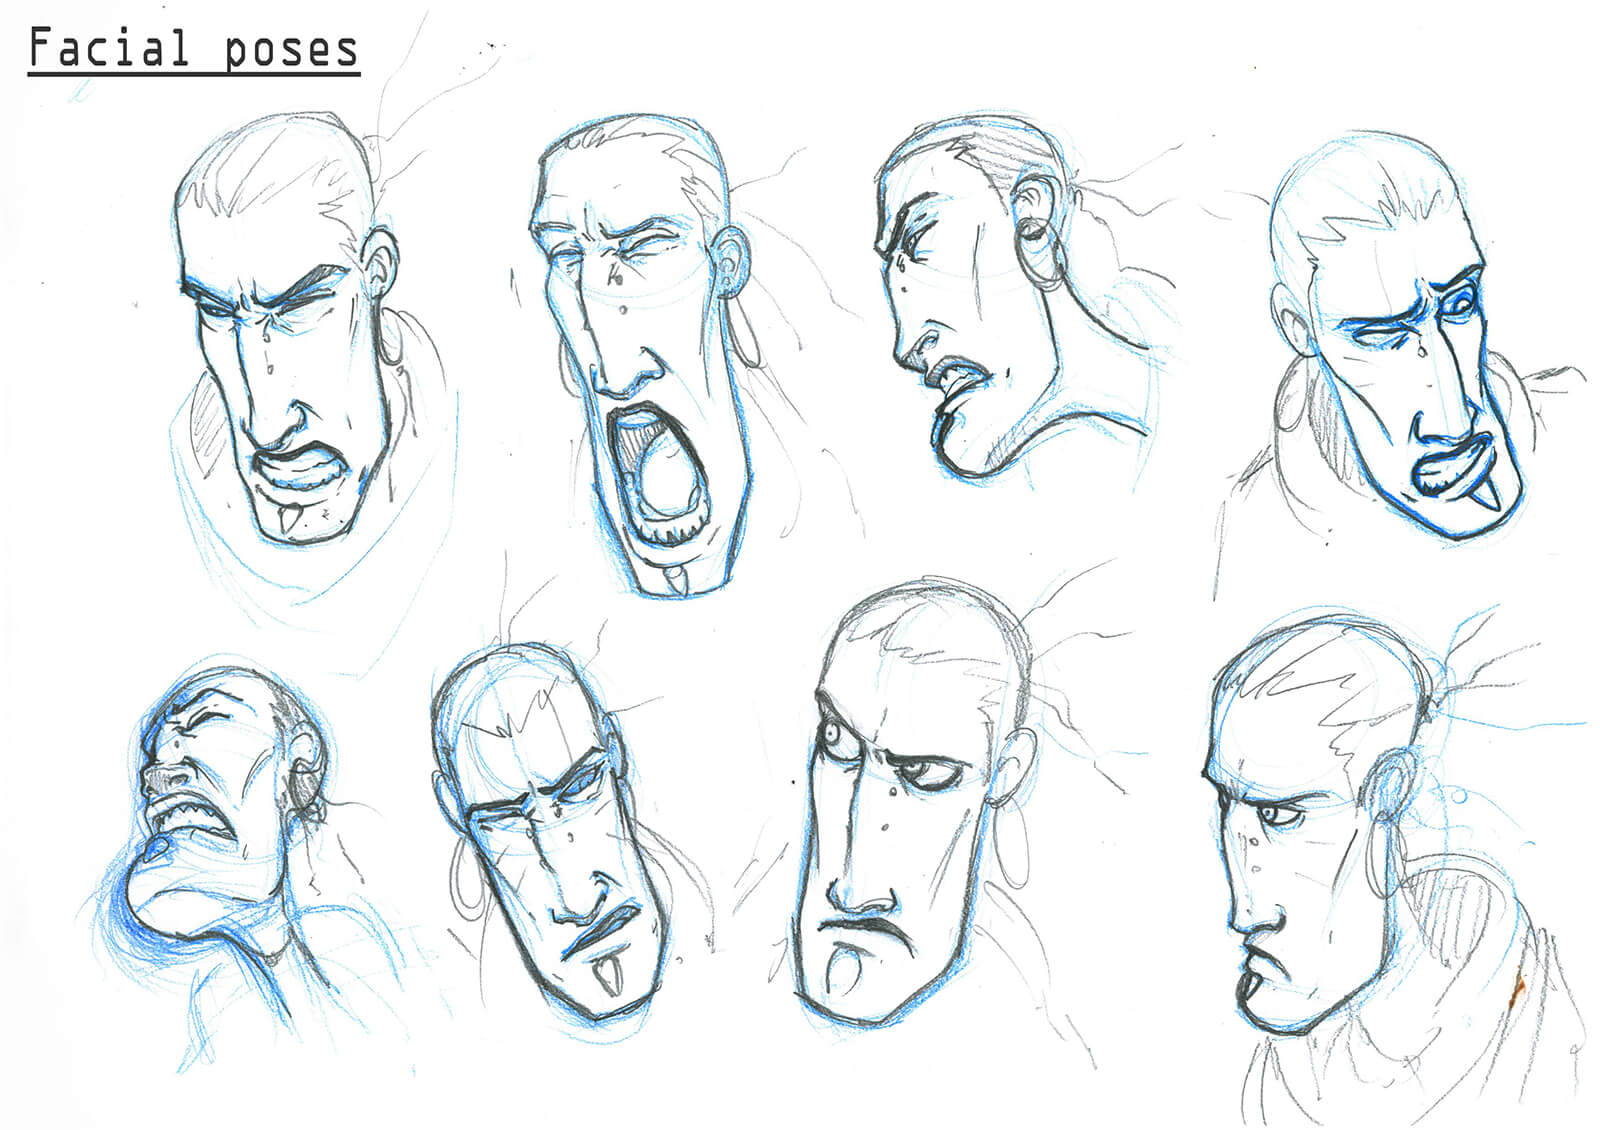 Blue and black sketches of a man with a thin, long face making expressions while in pain, straining, and glaring